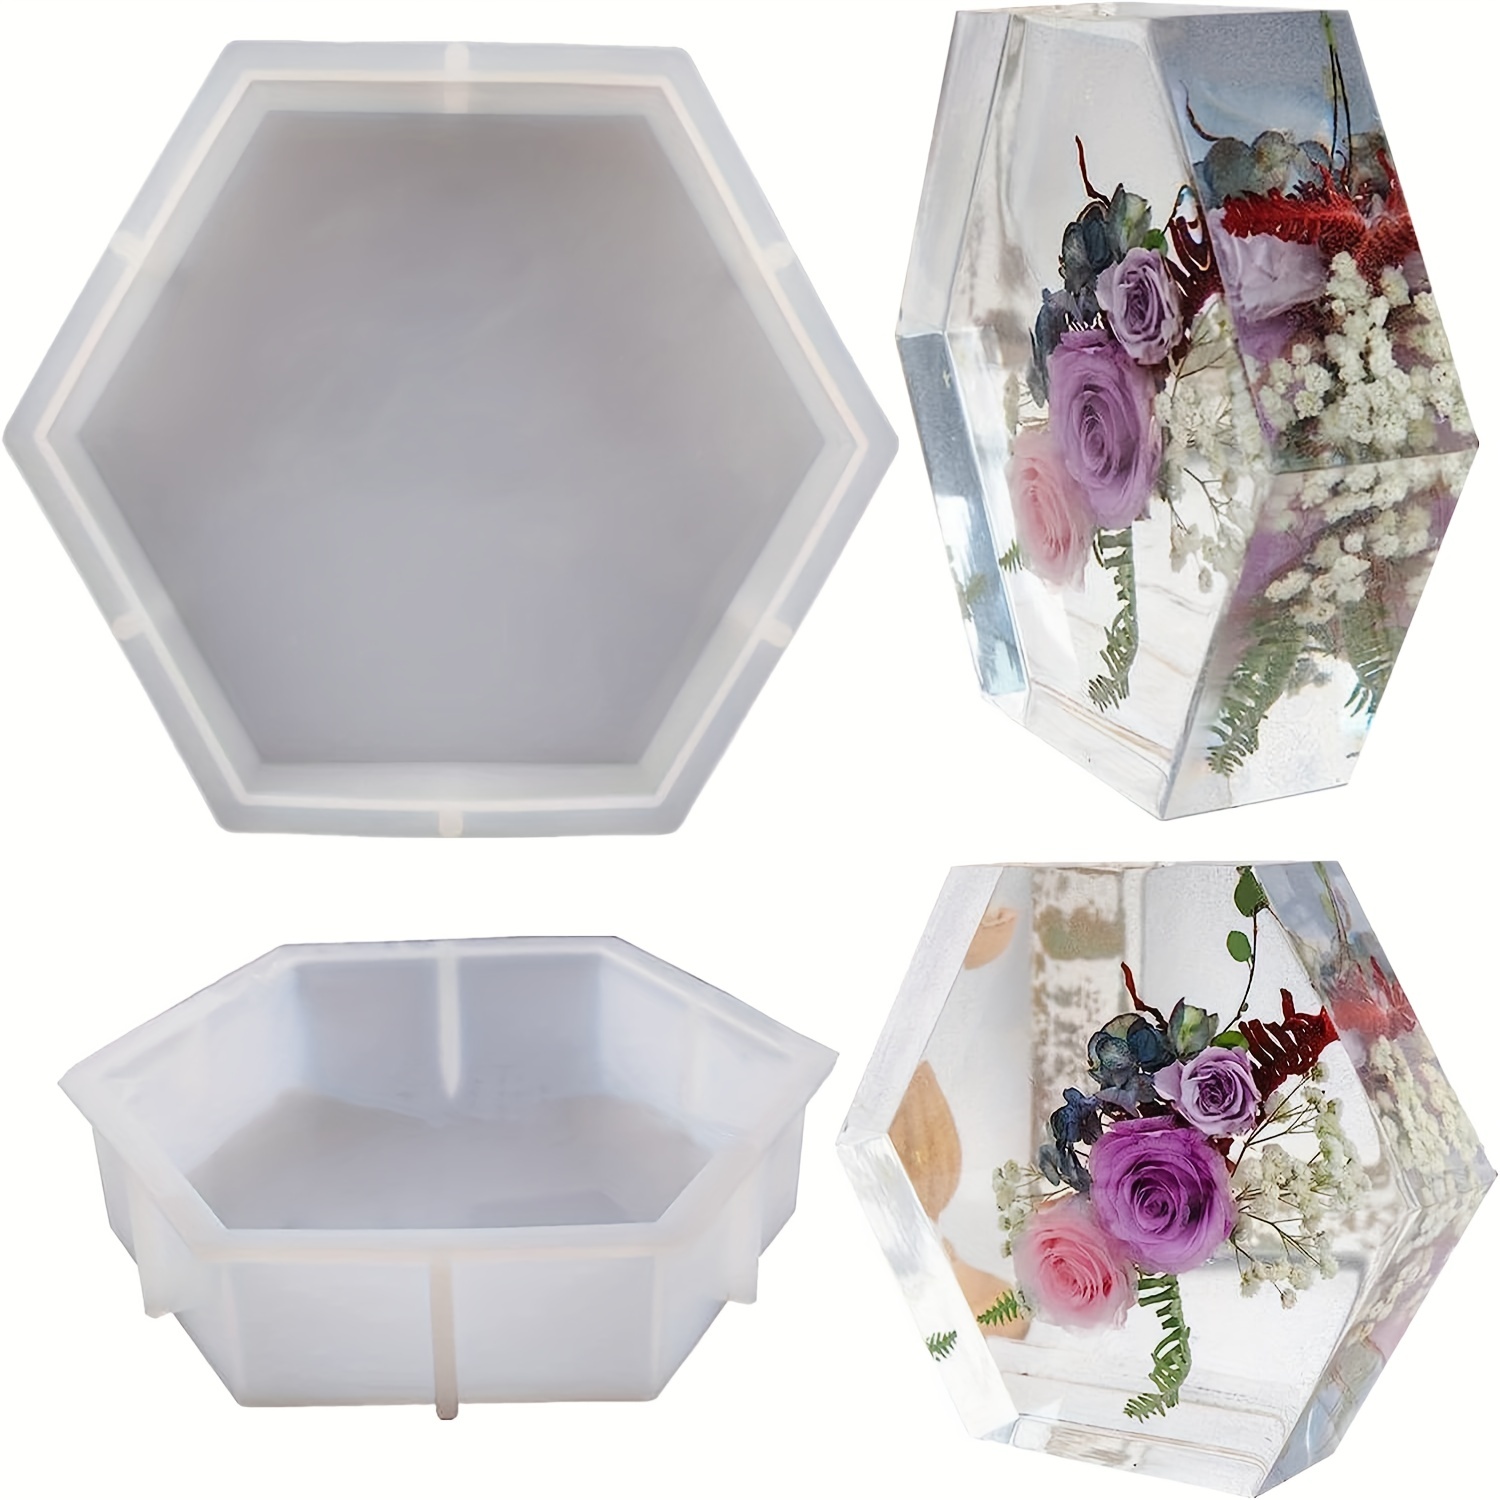 Large Resin Molds, Rectangle Silicone Molds For Resin Casting, Epoxy Resin  Molds For Flower Preserv